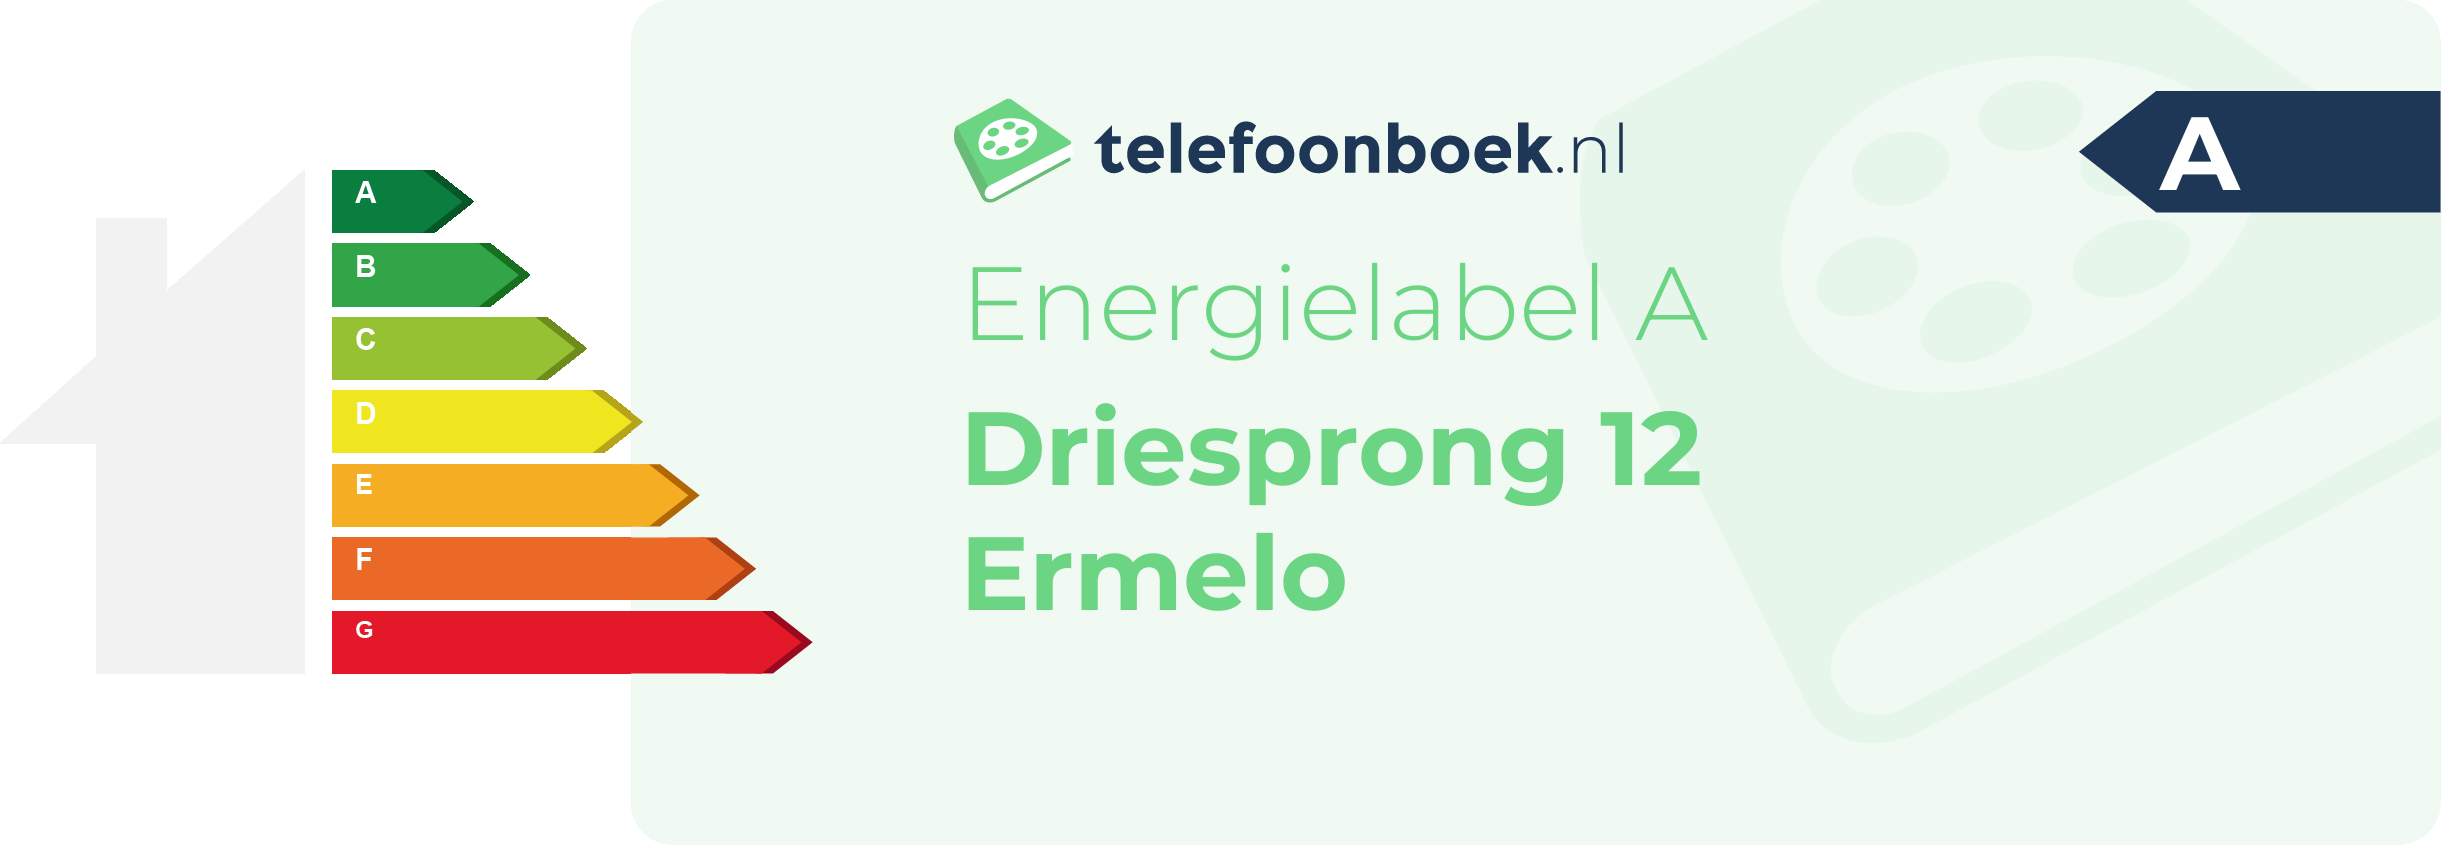 Energielabel Driesprong 12 Ermelo